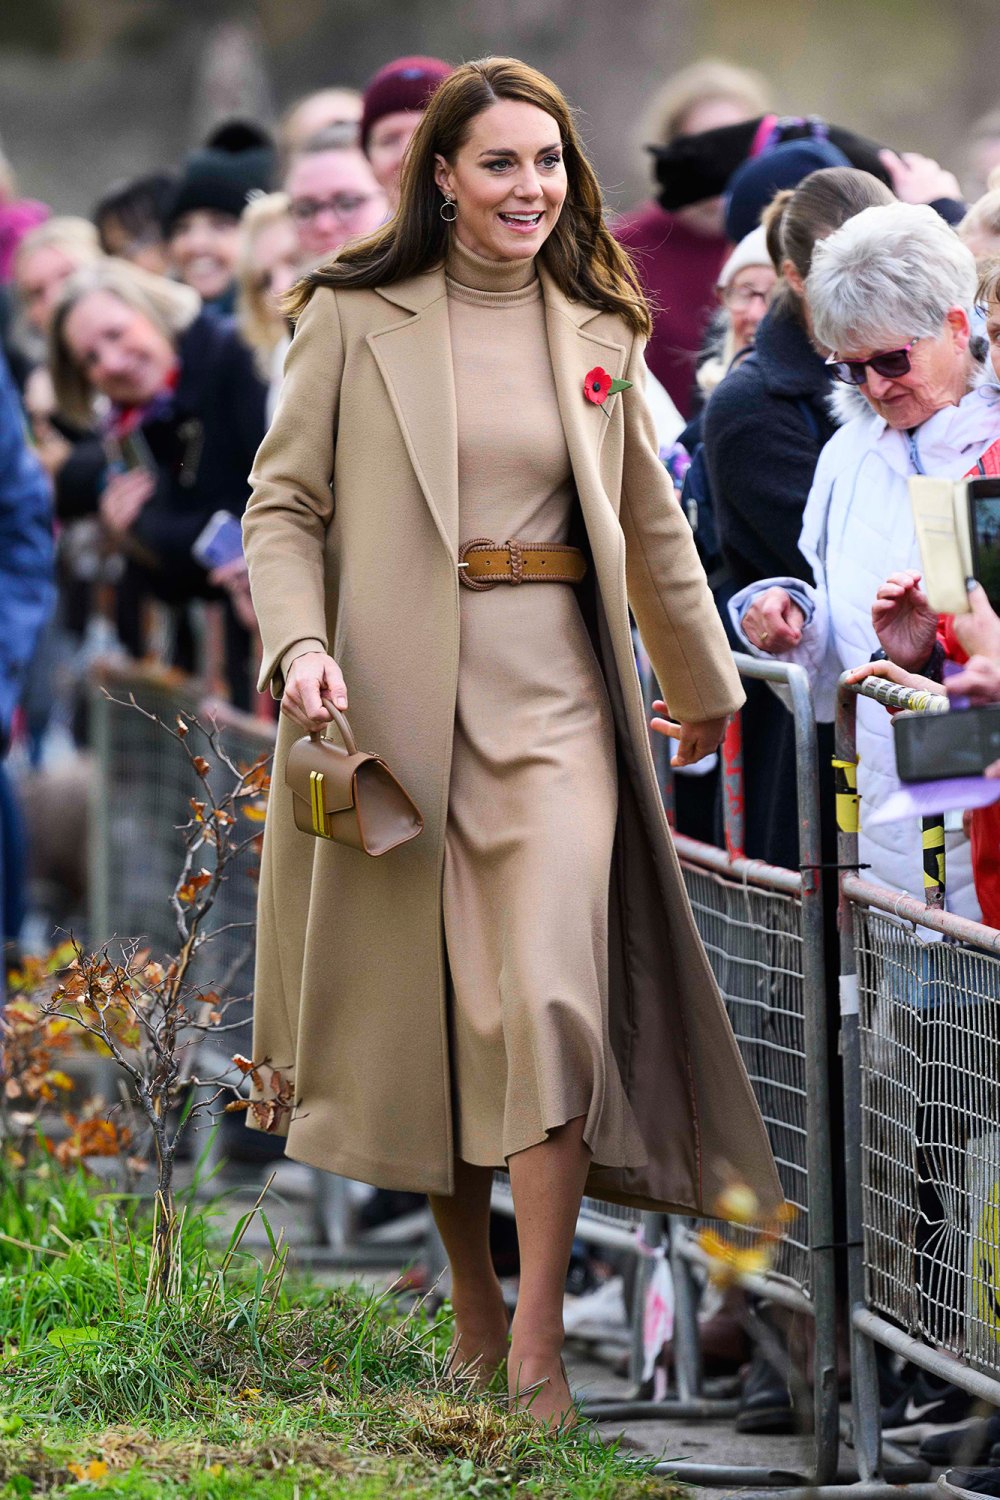 Princess Kate Had the Sweetest Response to a Woman Who Skipped Her Hair Appointment to See Her 013 Prince William and Catherine Princess of Wales visit The Street, Scarborough, UK - 03 Nov 2022